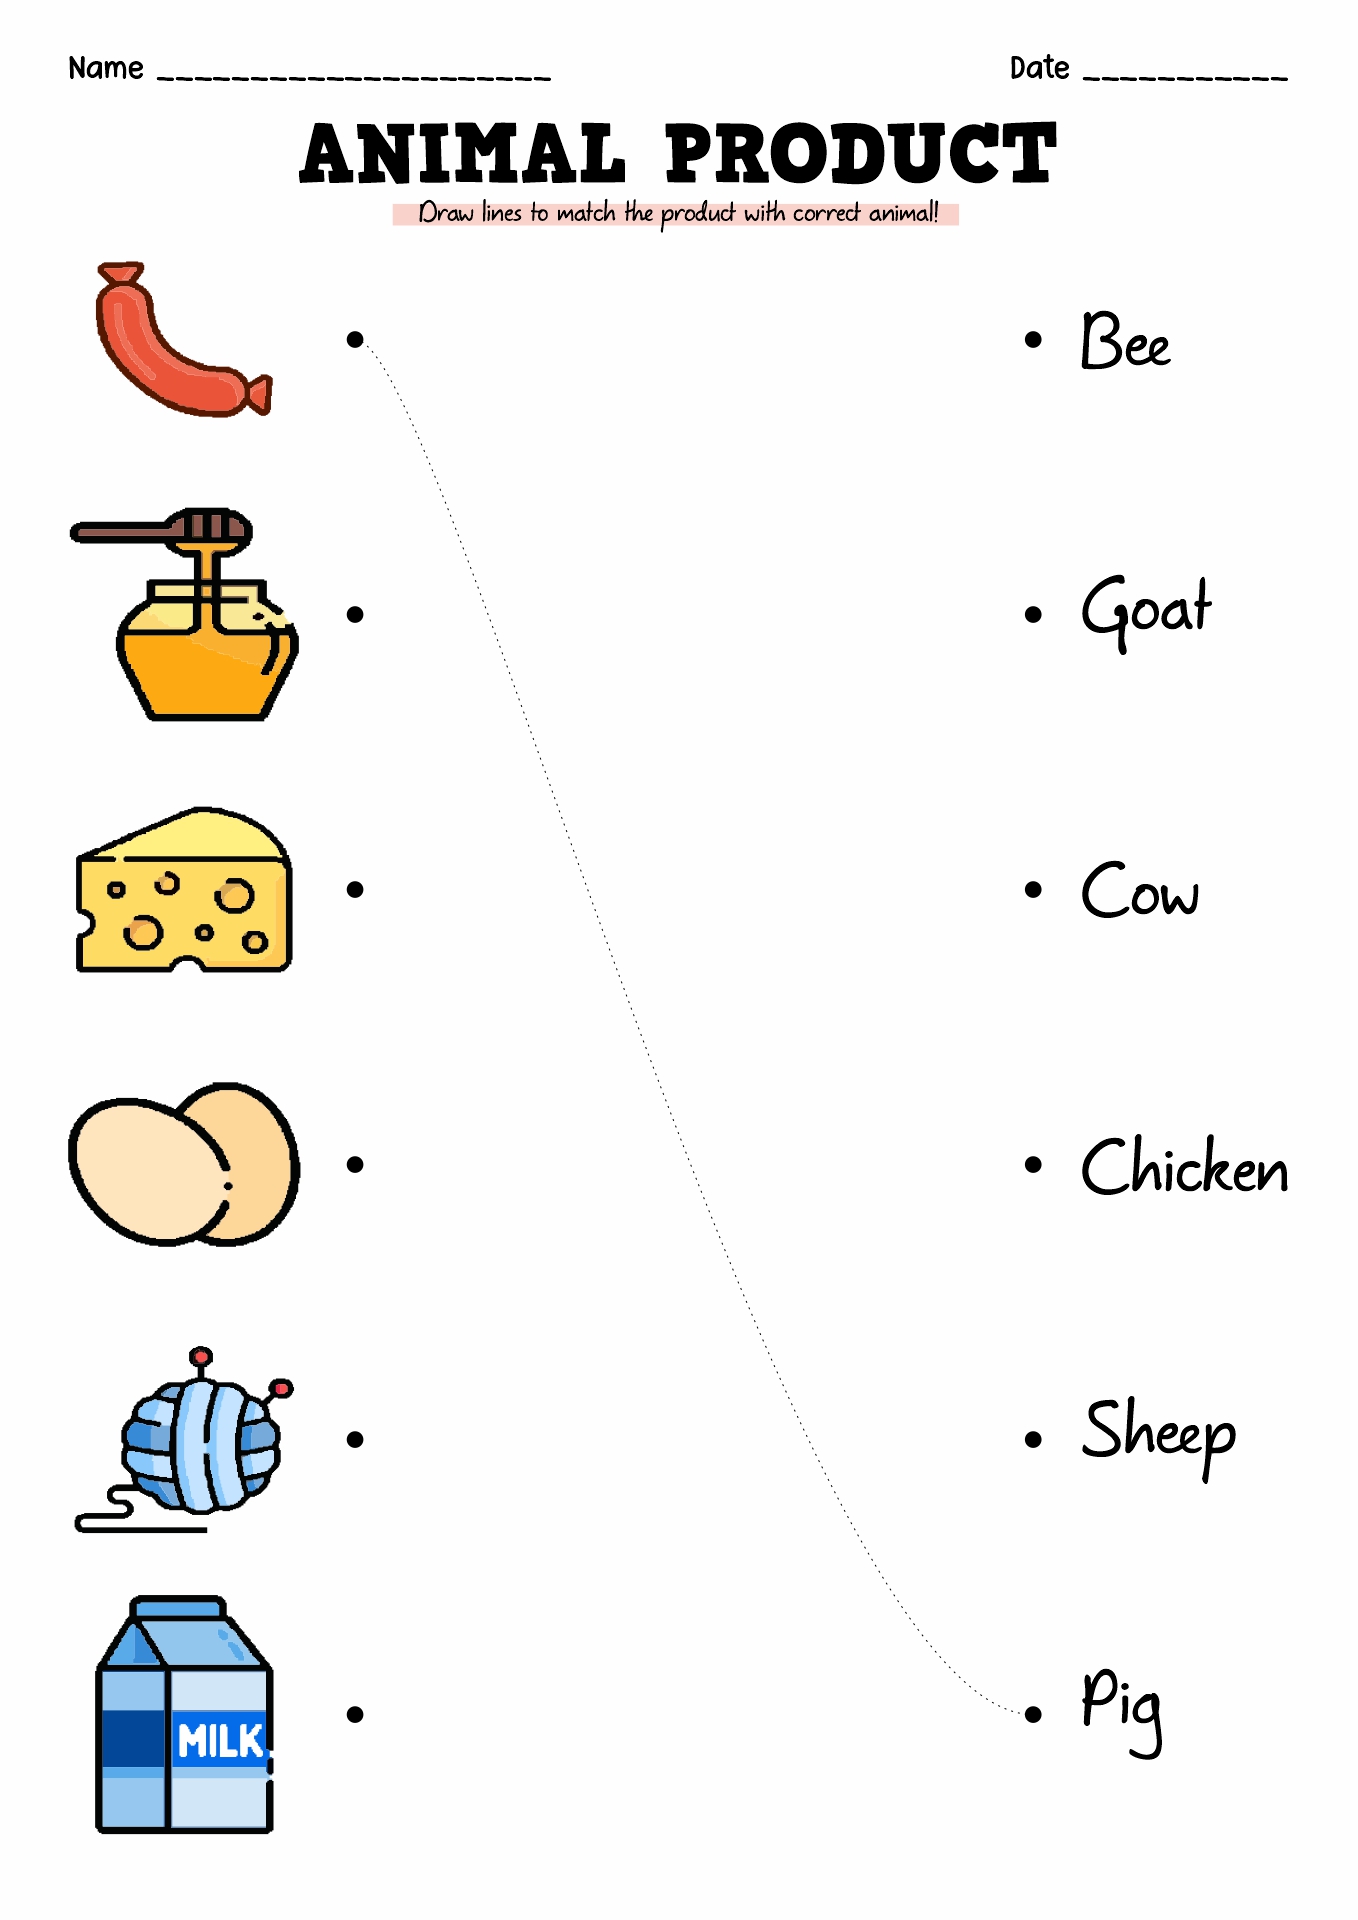 Worksheet Farm Animals and Their Products Image